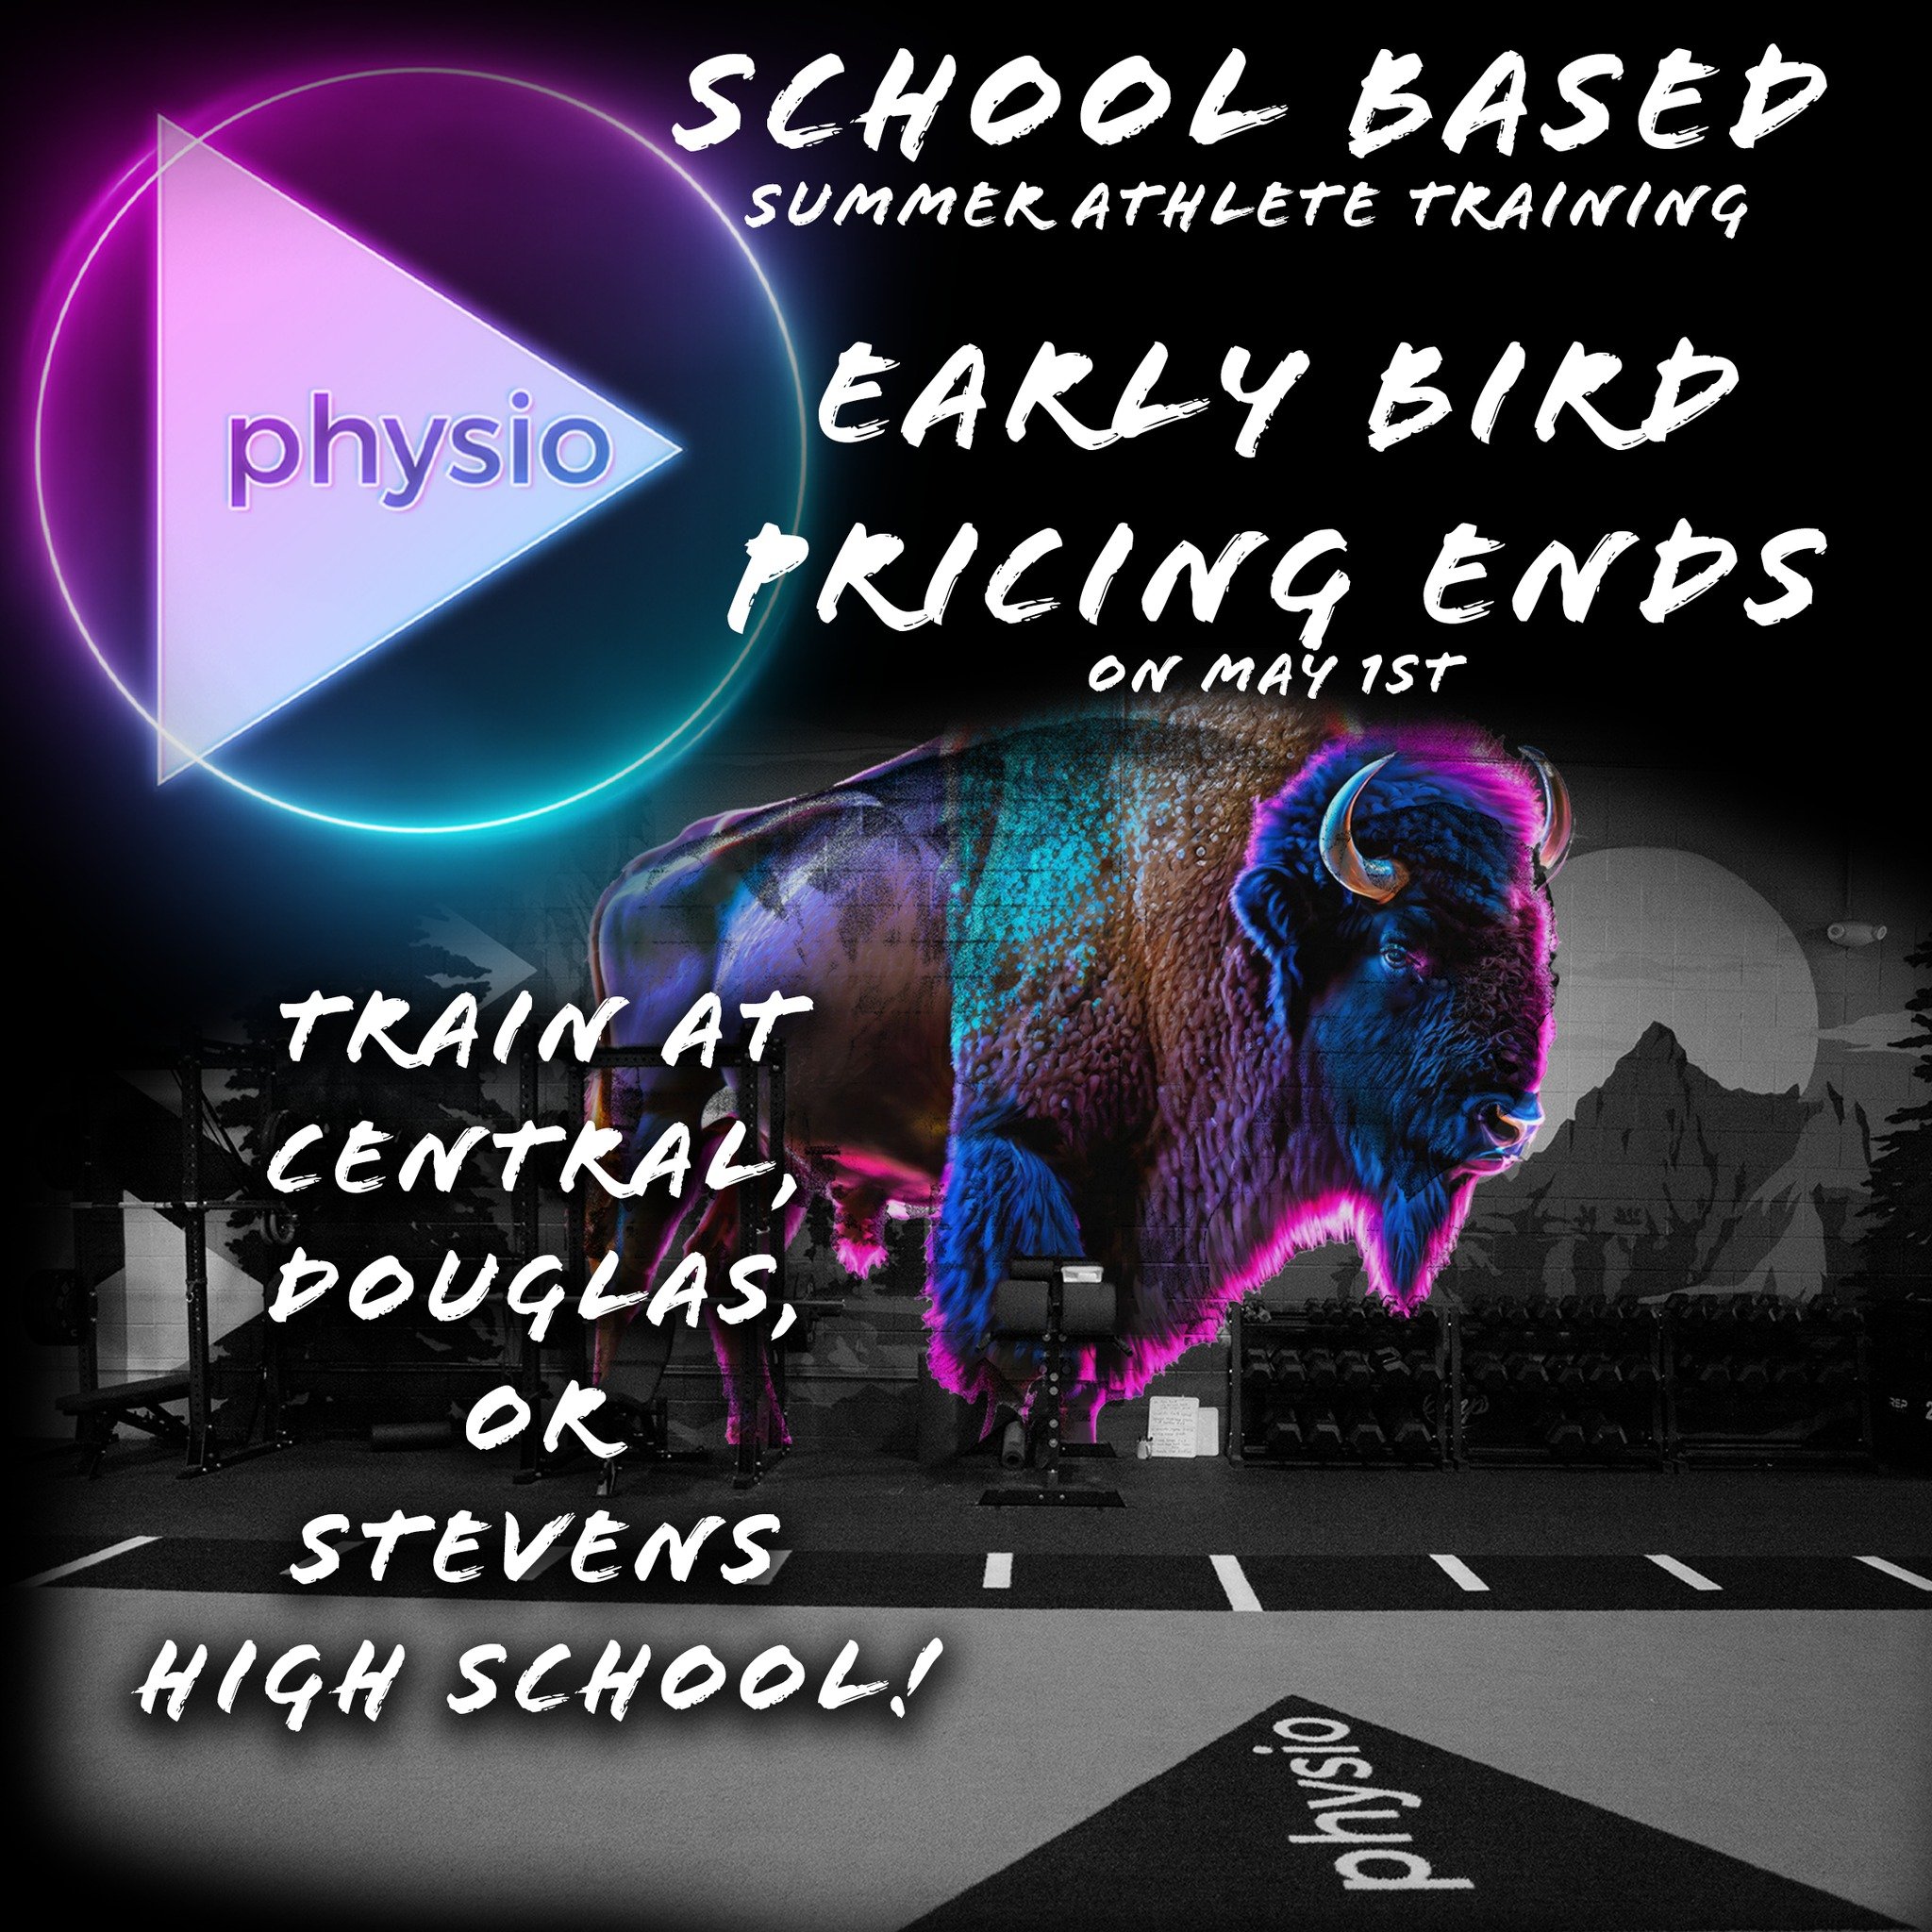 Don't miss out on this great deal&mdash;register BEFORE May 1st and take advantage of our Early Bird pricing on our school-based training! It's open to all middle through high school athletes, with options at Central, Douglas, and Stevens. 

This sum